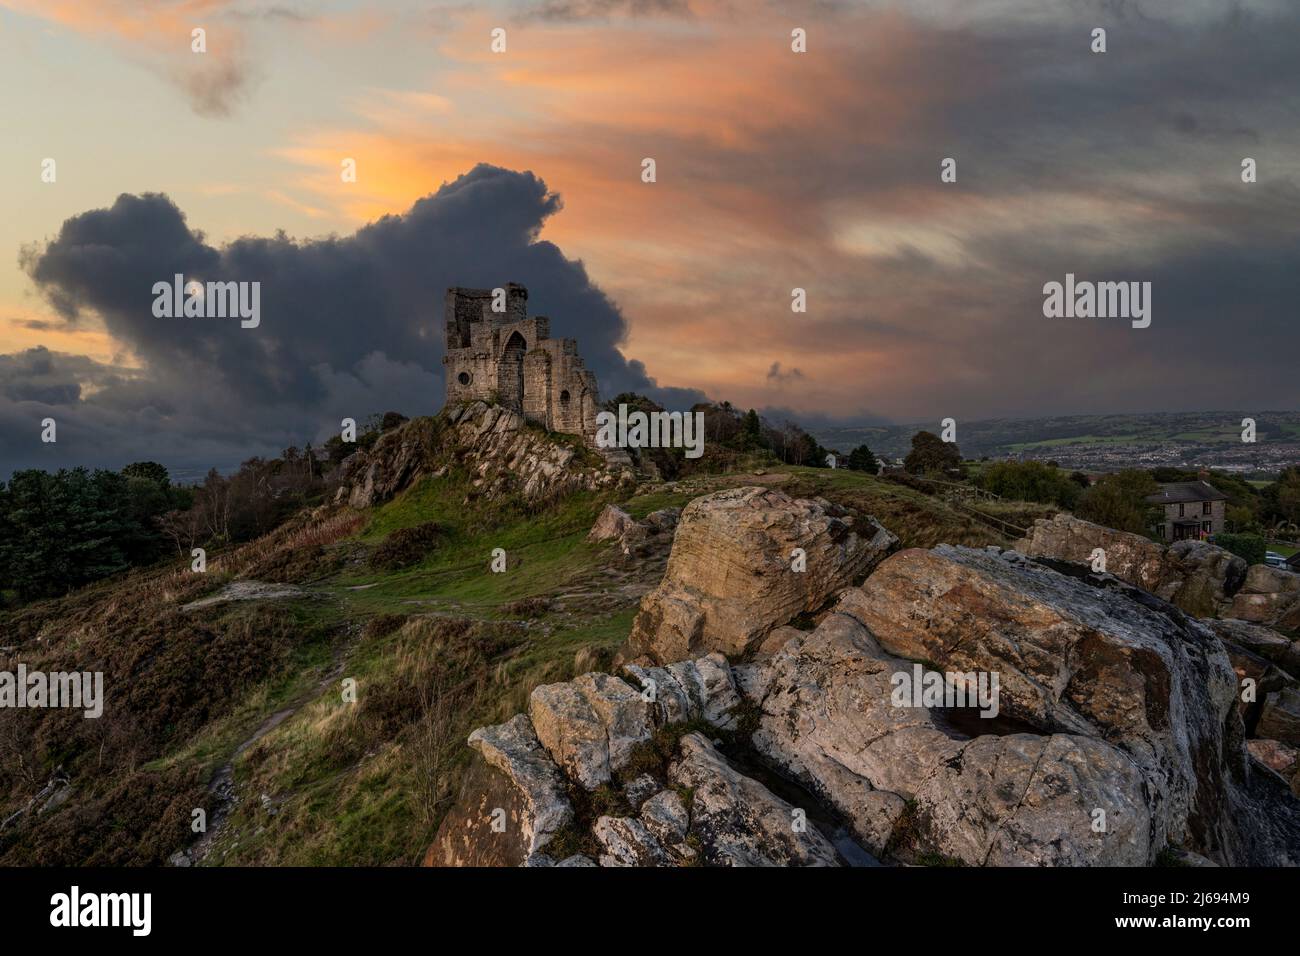 Mow Cop Castle with stormy sky at sunset, Cheshire, England, United Kingdom, Europe Stock Photo